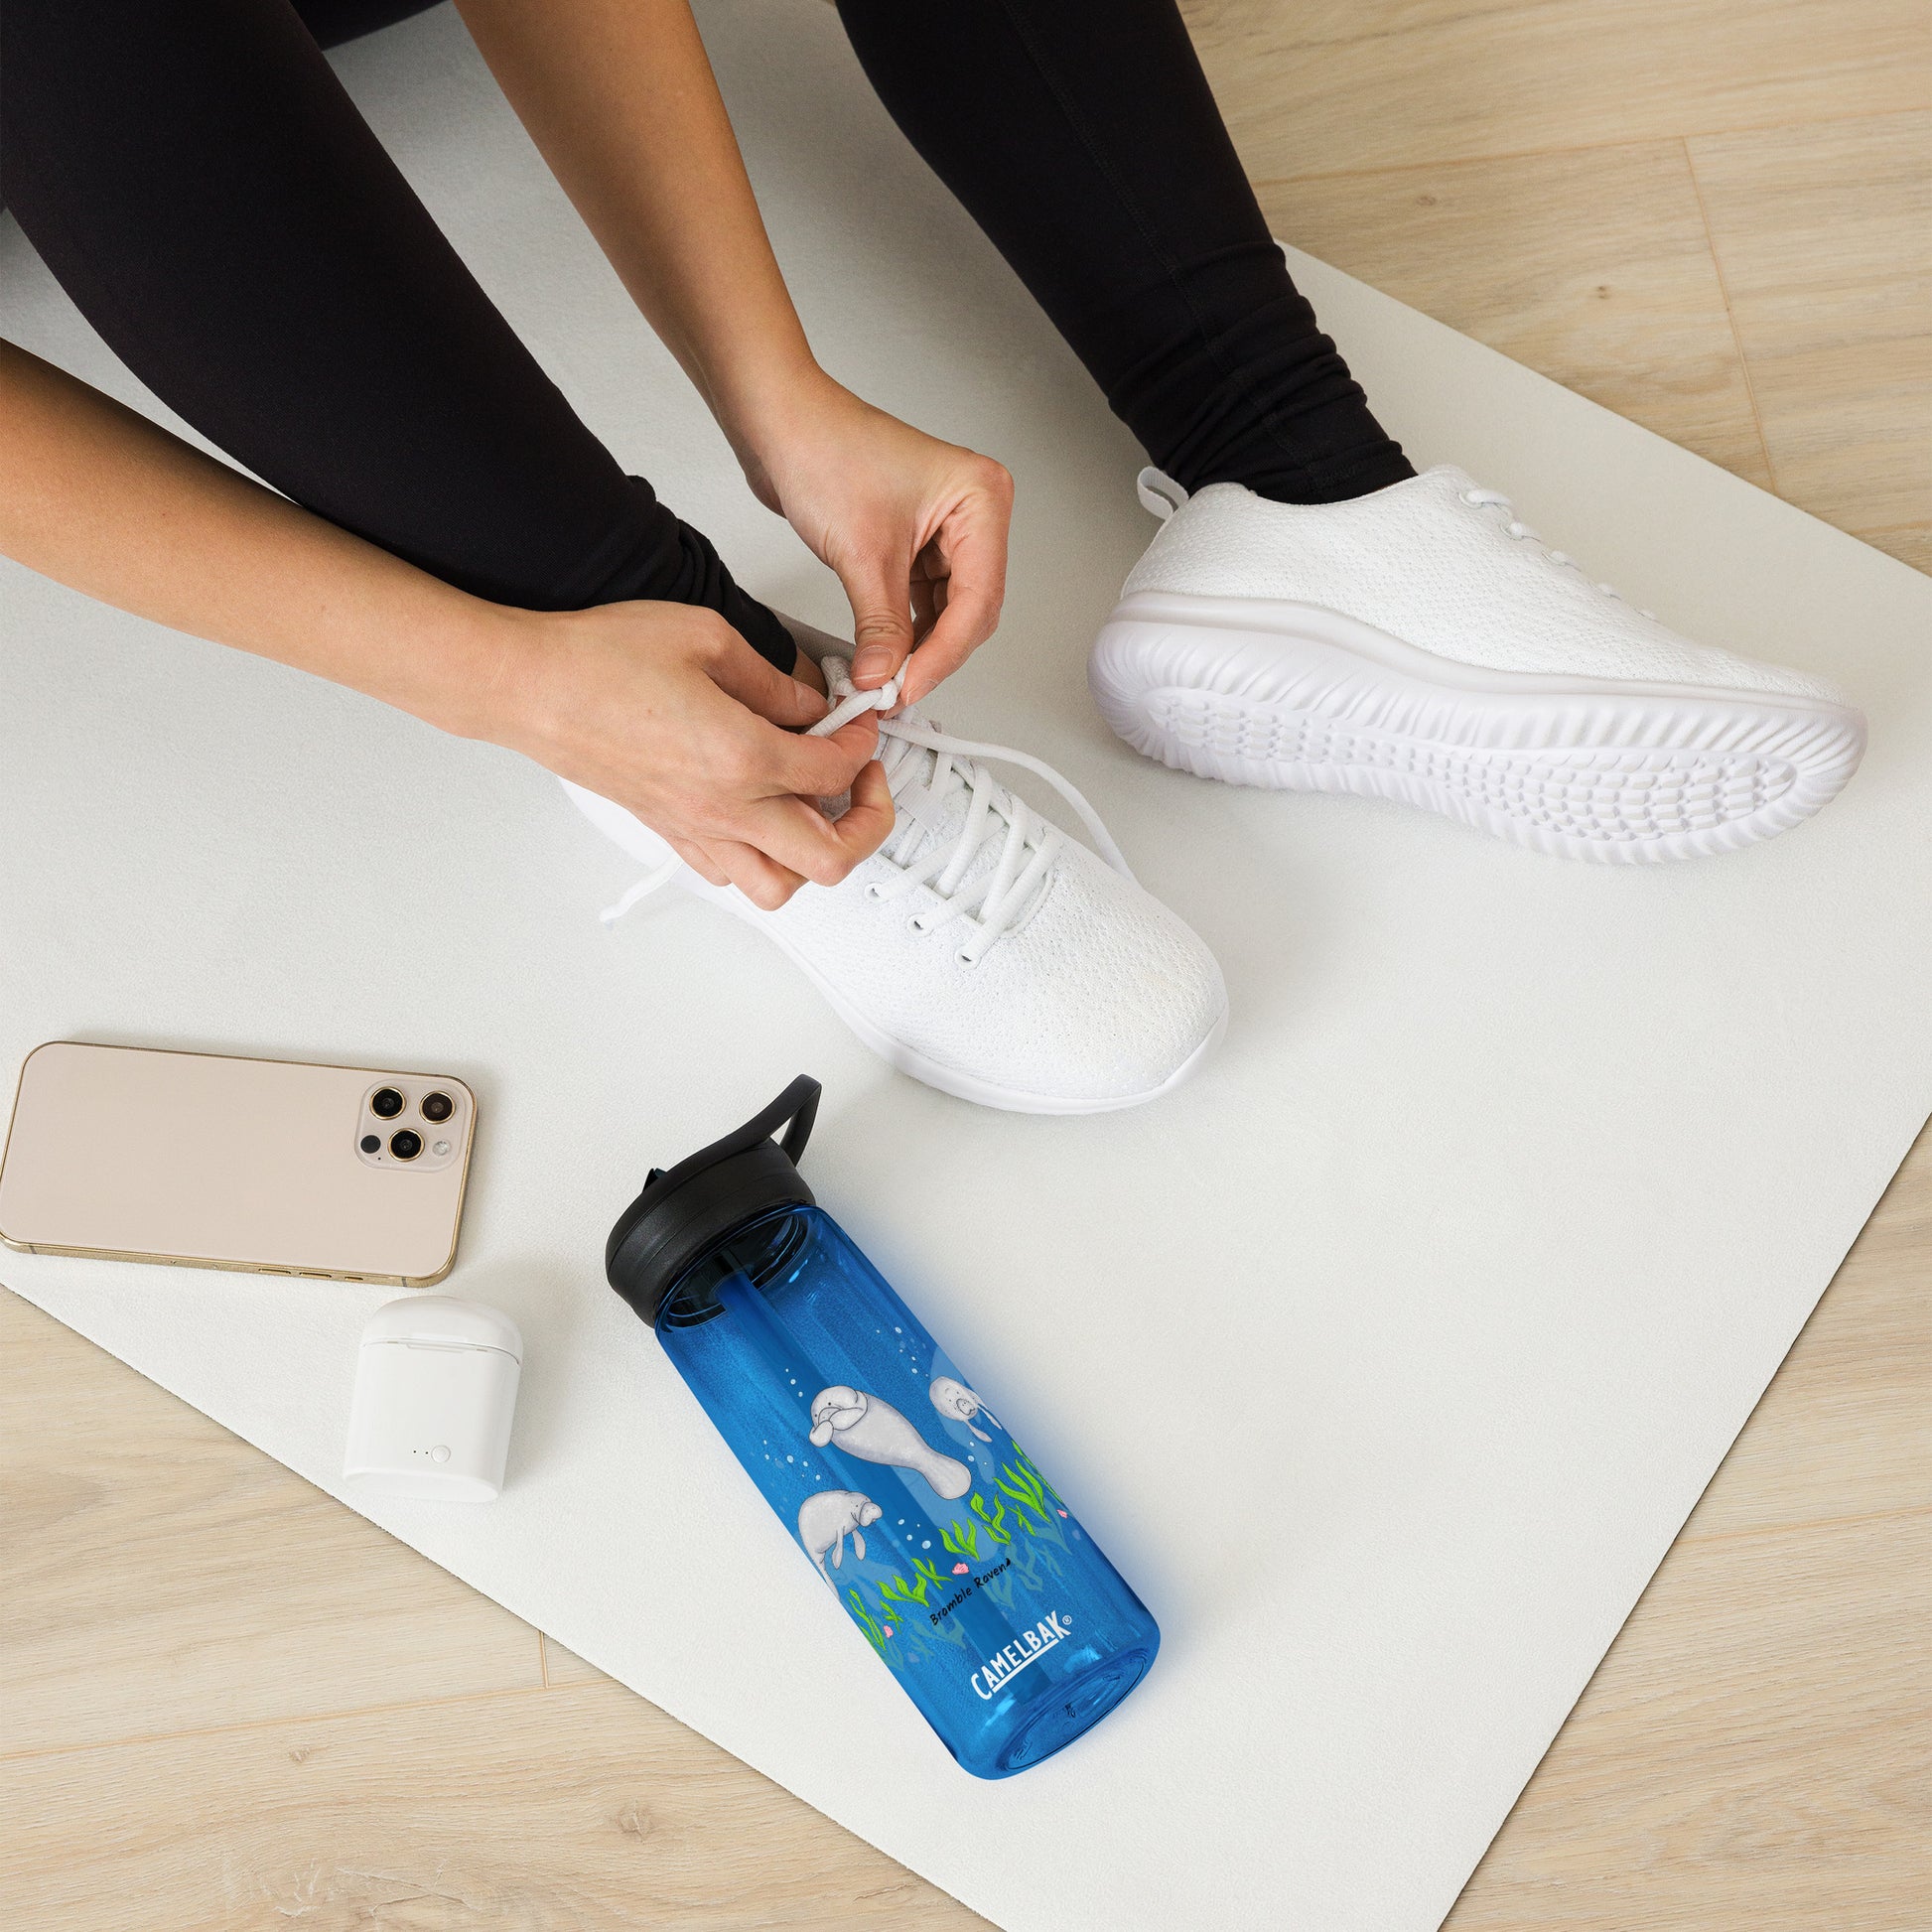 25 ounce sports water bottle with spill proof lid and bite valve. Dark blue stain and odor-resistant BPA-free plastic with manatee designs around the bottle, swimming above the seaweed and shells. Shown on yoga mat by model tying shoes.